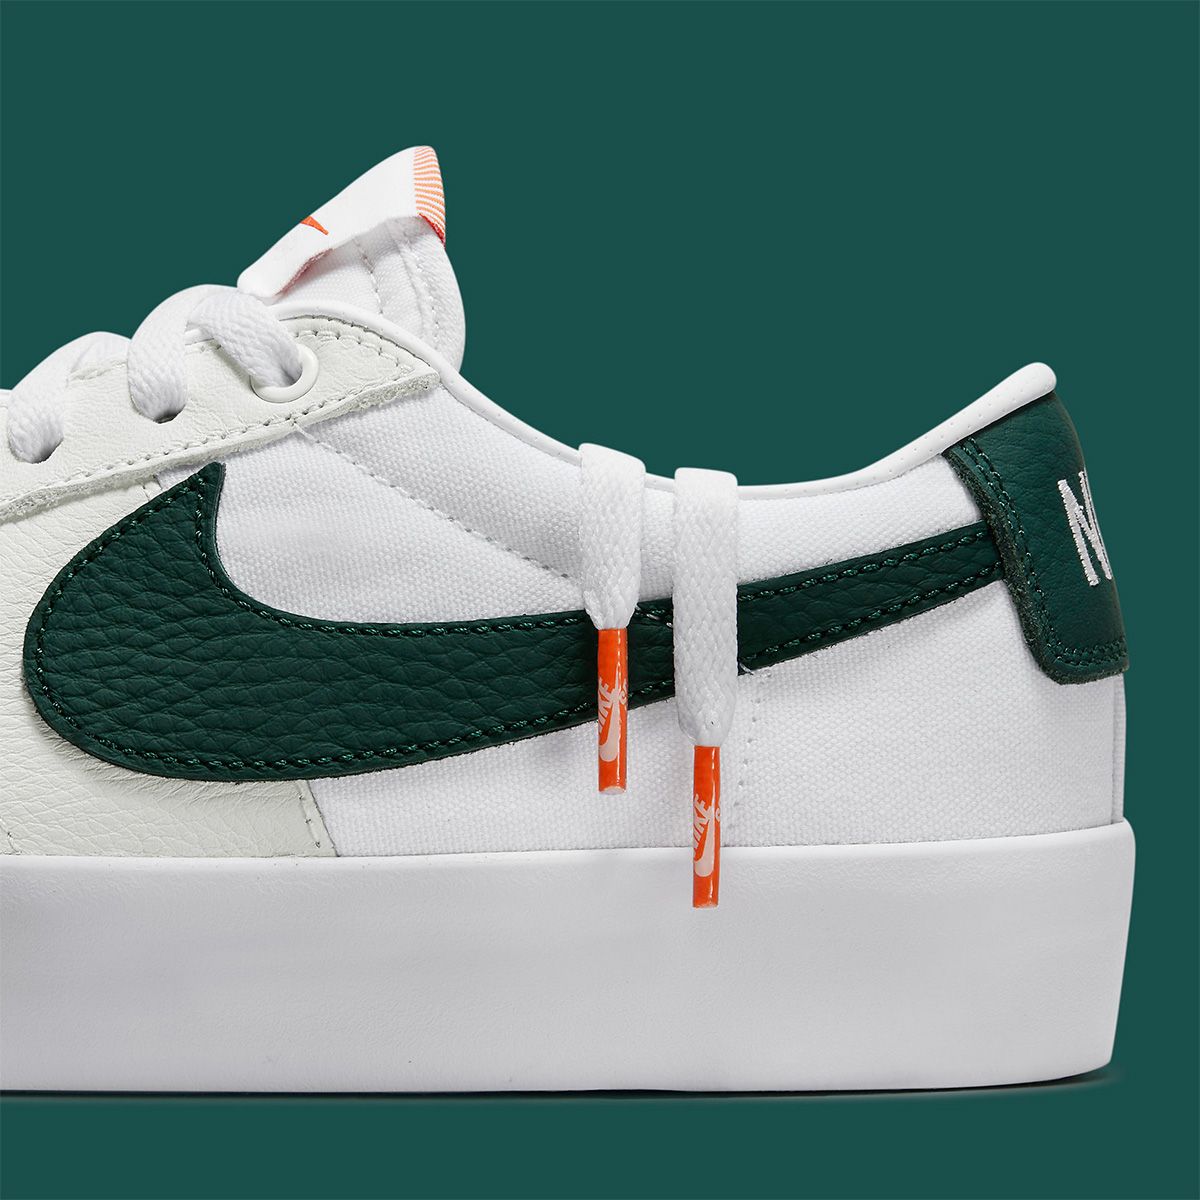 The Nike SB Blazer Gears-Up in White and Green for Fall | HOUSE OF